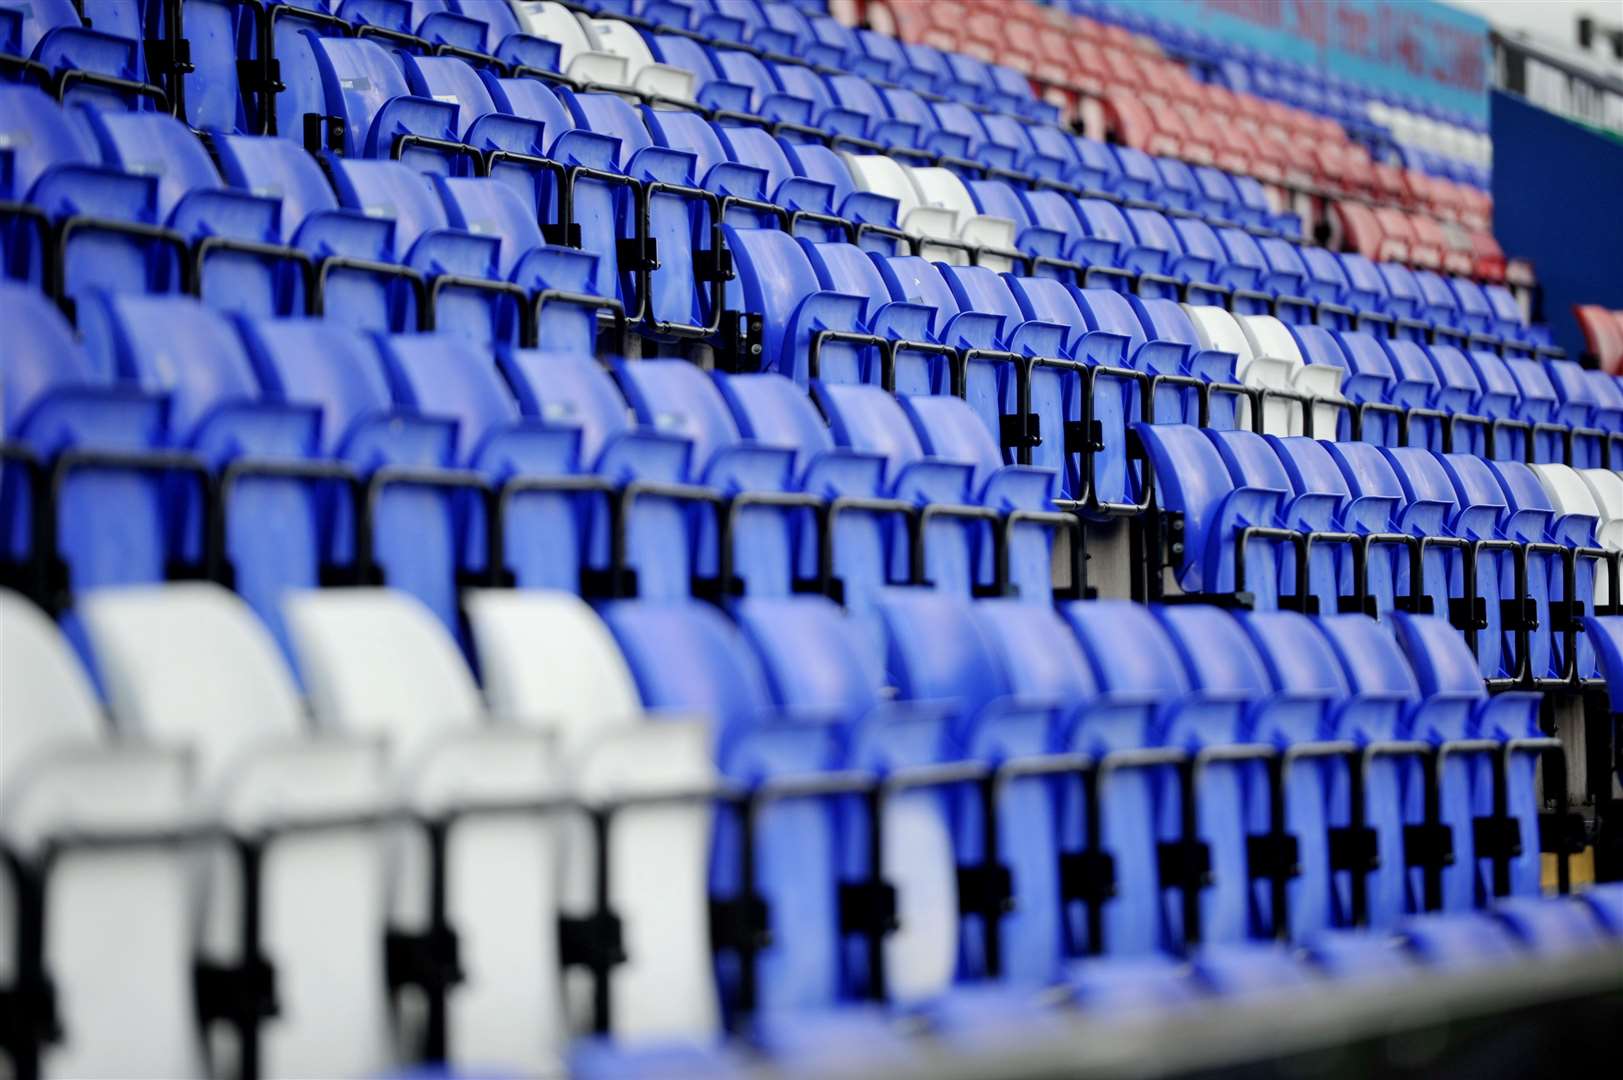 Inverness Caledonian Thistle have announced losses of over £3 million in last five years.